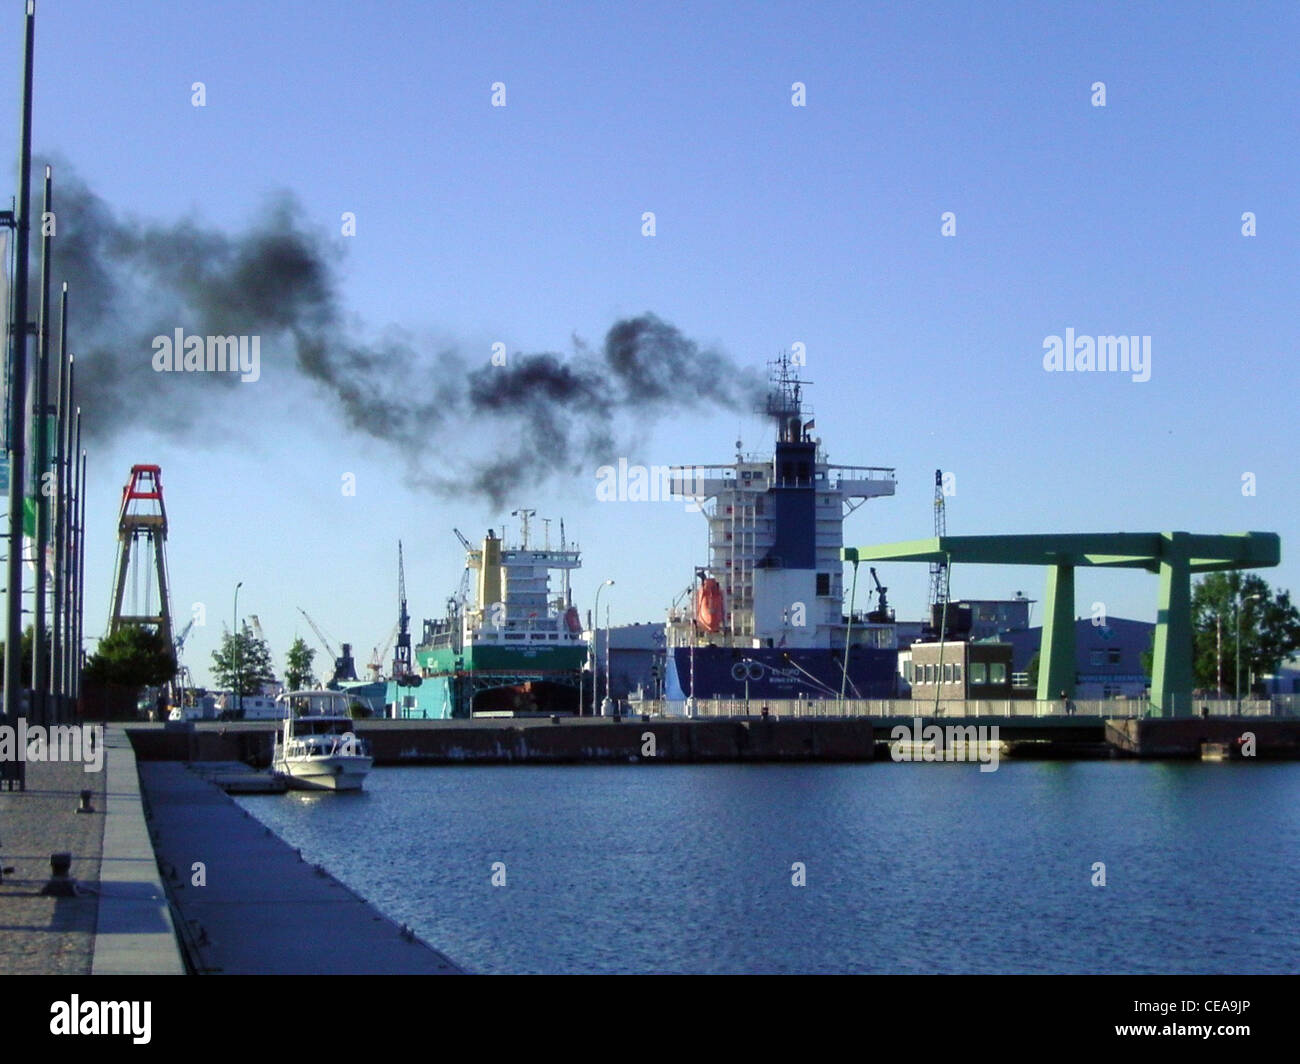 The cargo ship El Toro emitted some smoke while running up the engine Stock Photo